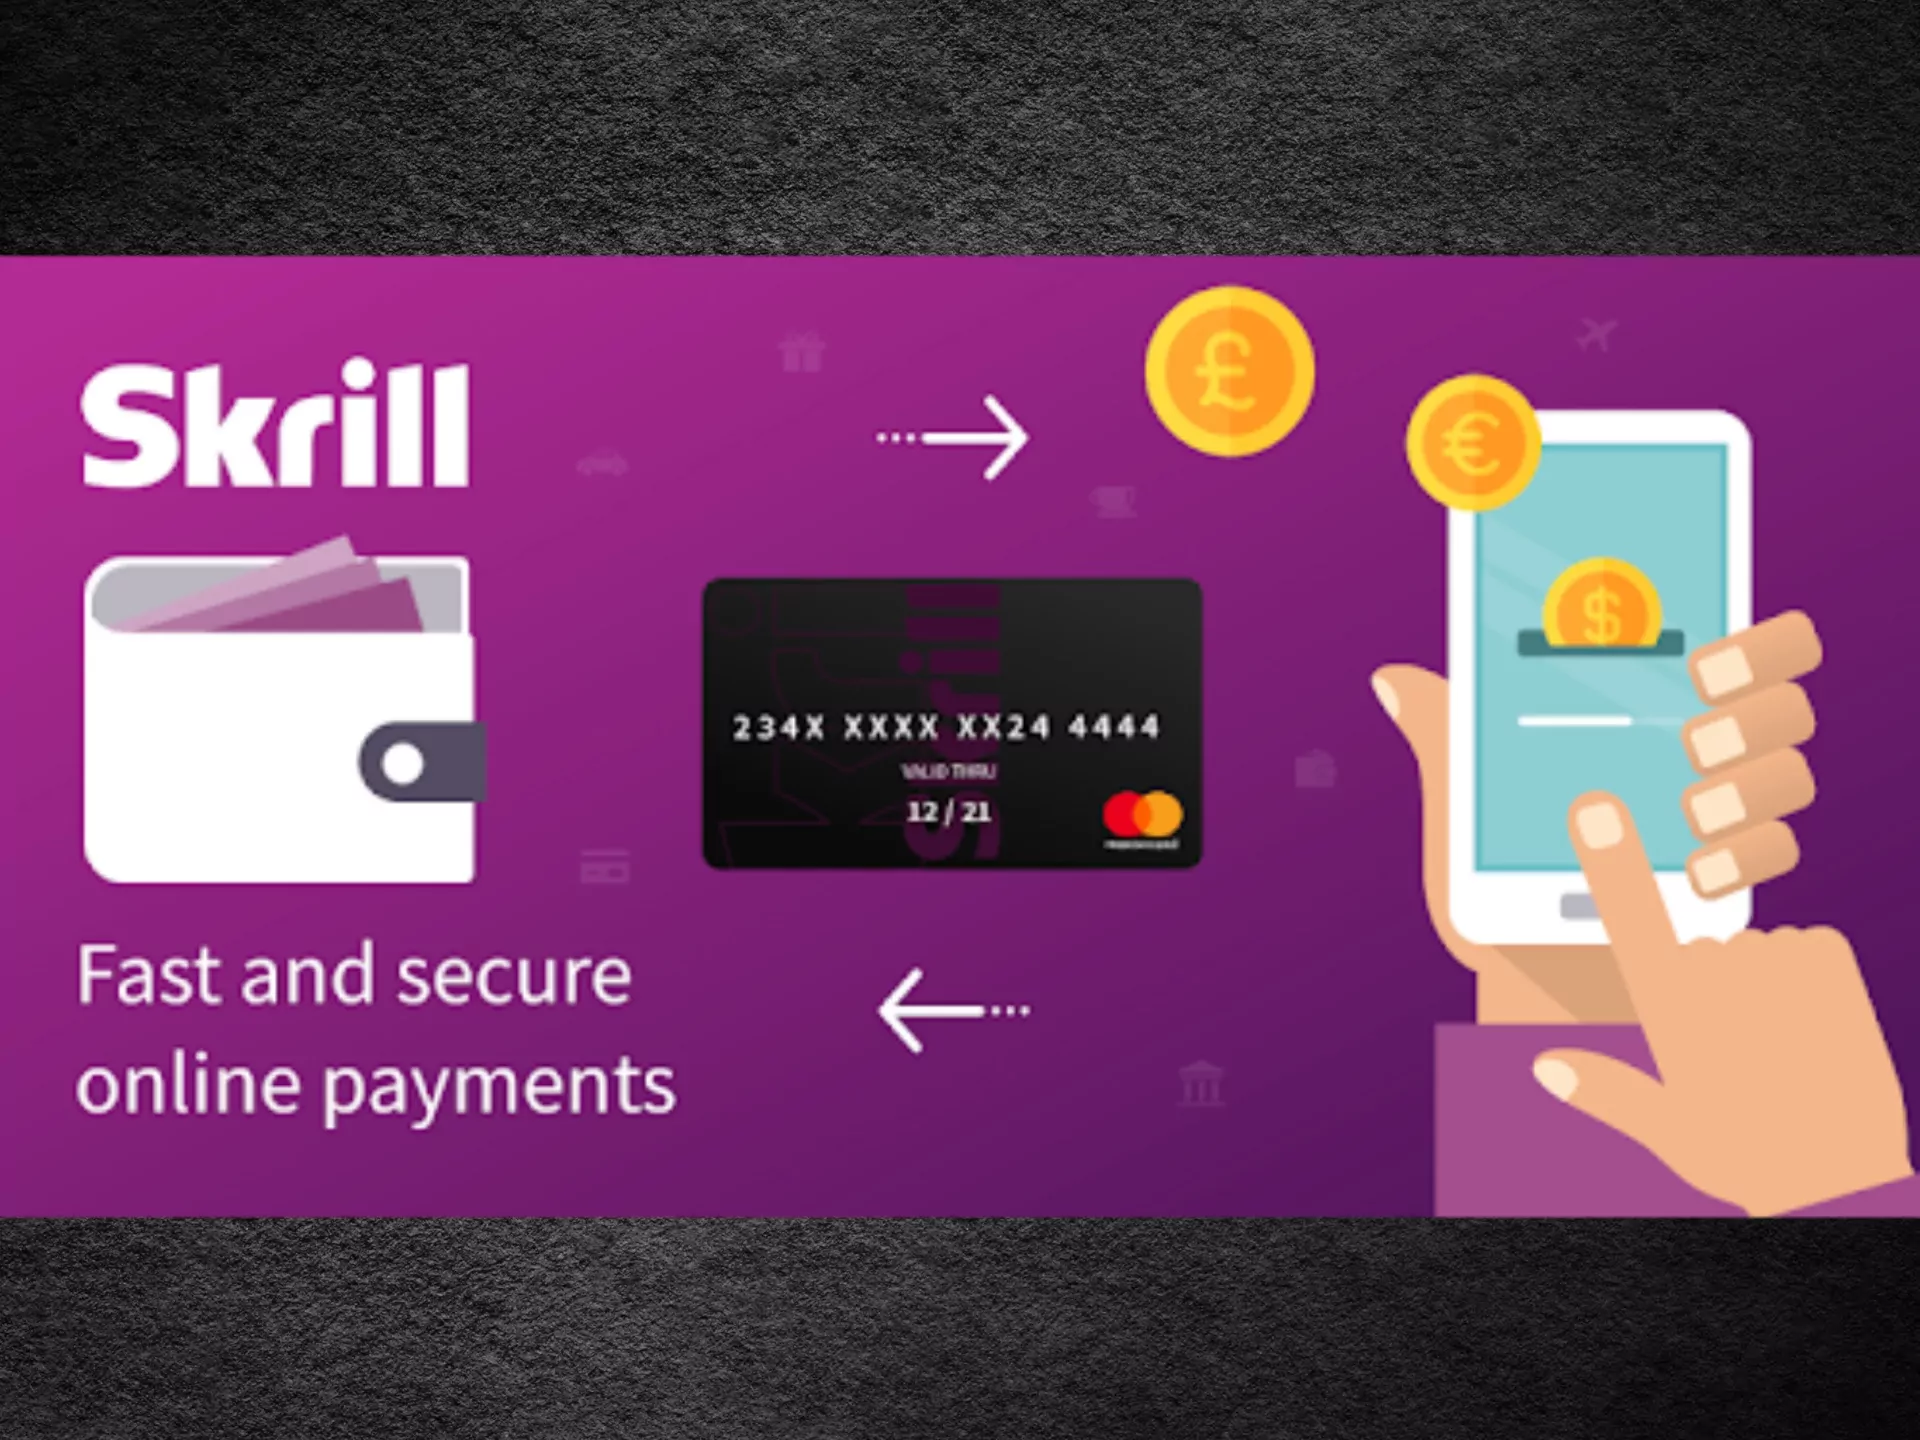 Just sign up for Skrill and start use it as a convenient casino payment method.